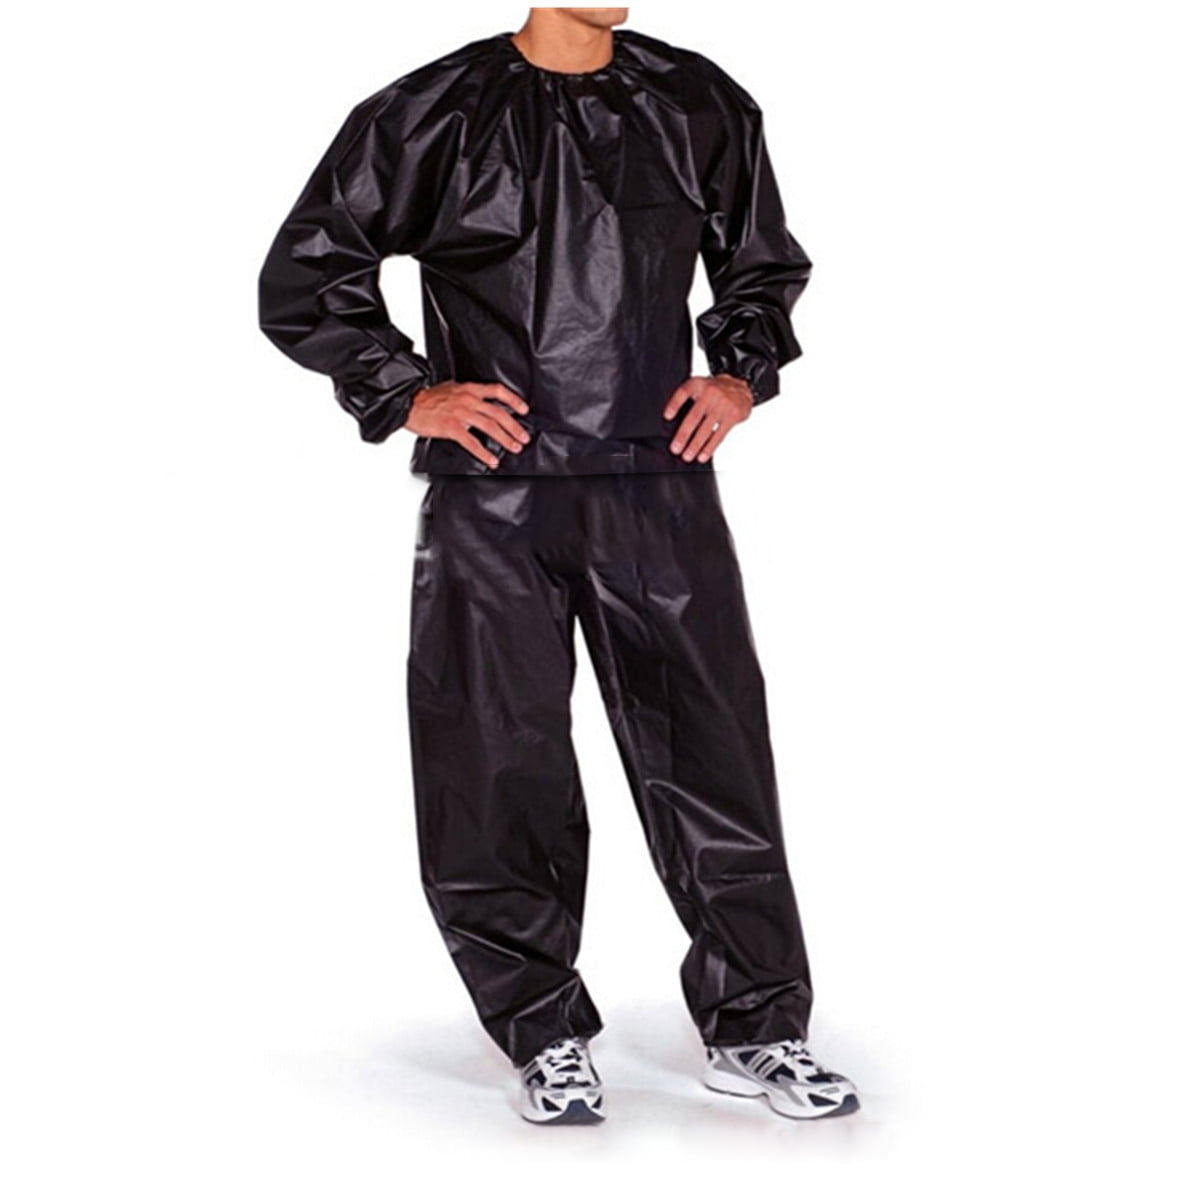 Sauna Exercise Gym Series 8 Fitness Weight Loss Sweat Suit Size L/XL 